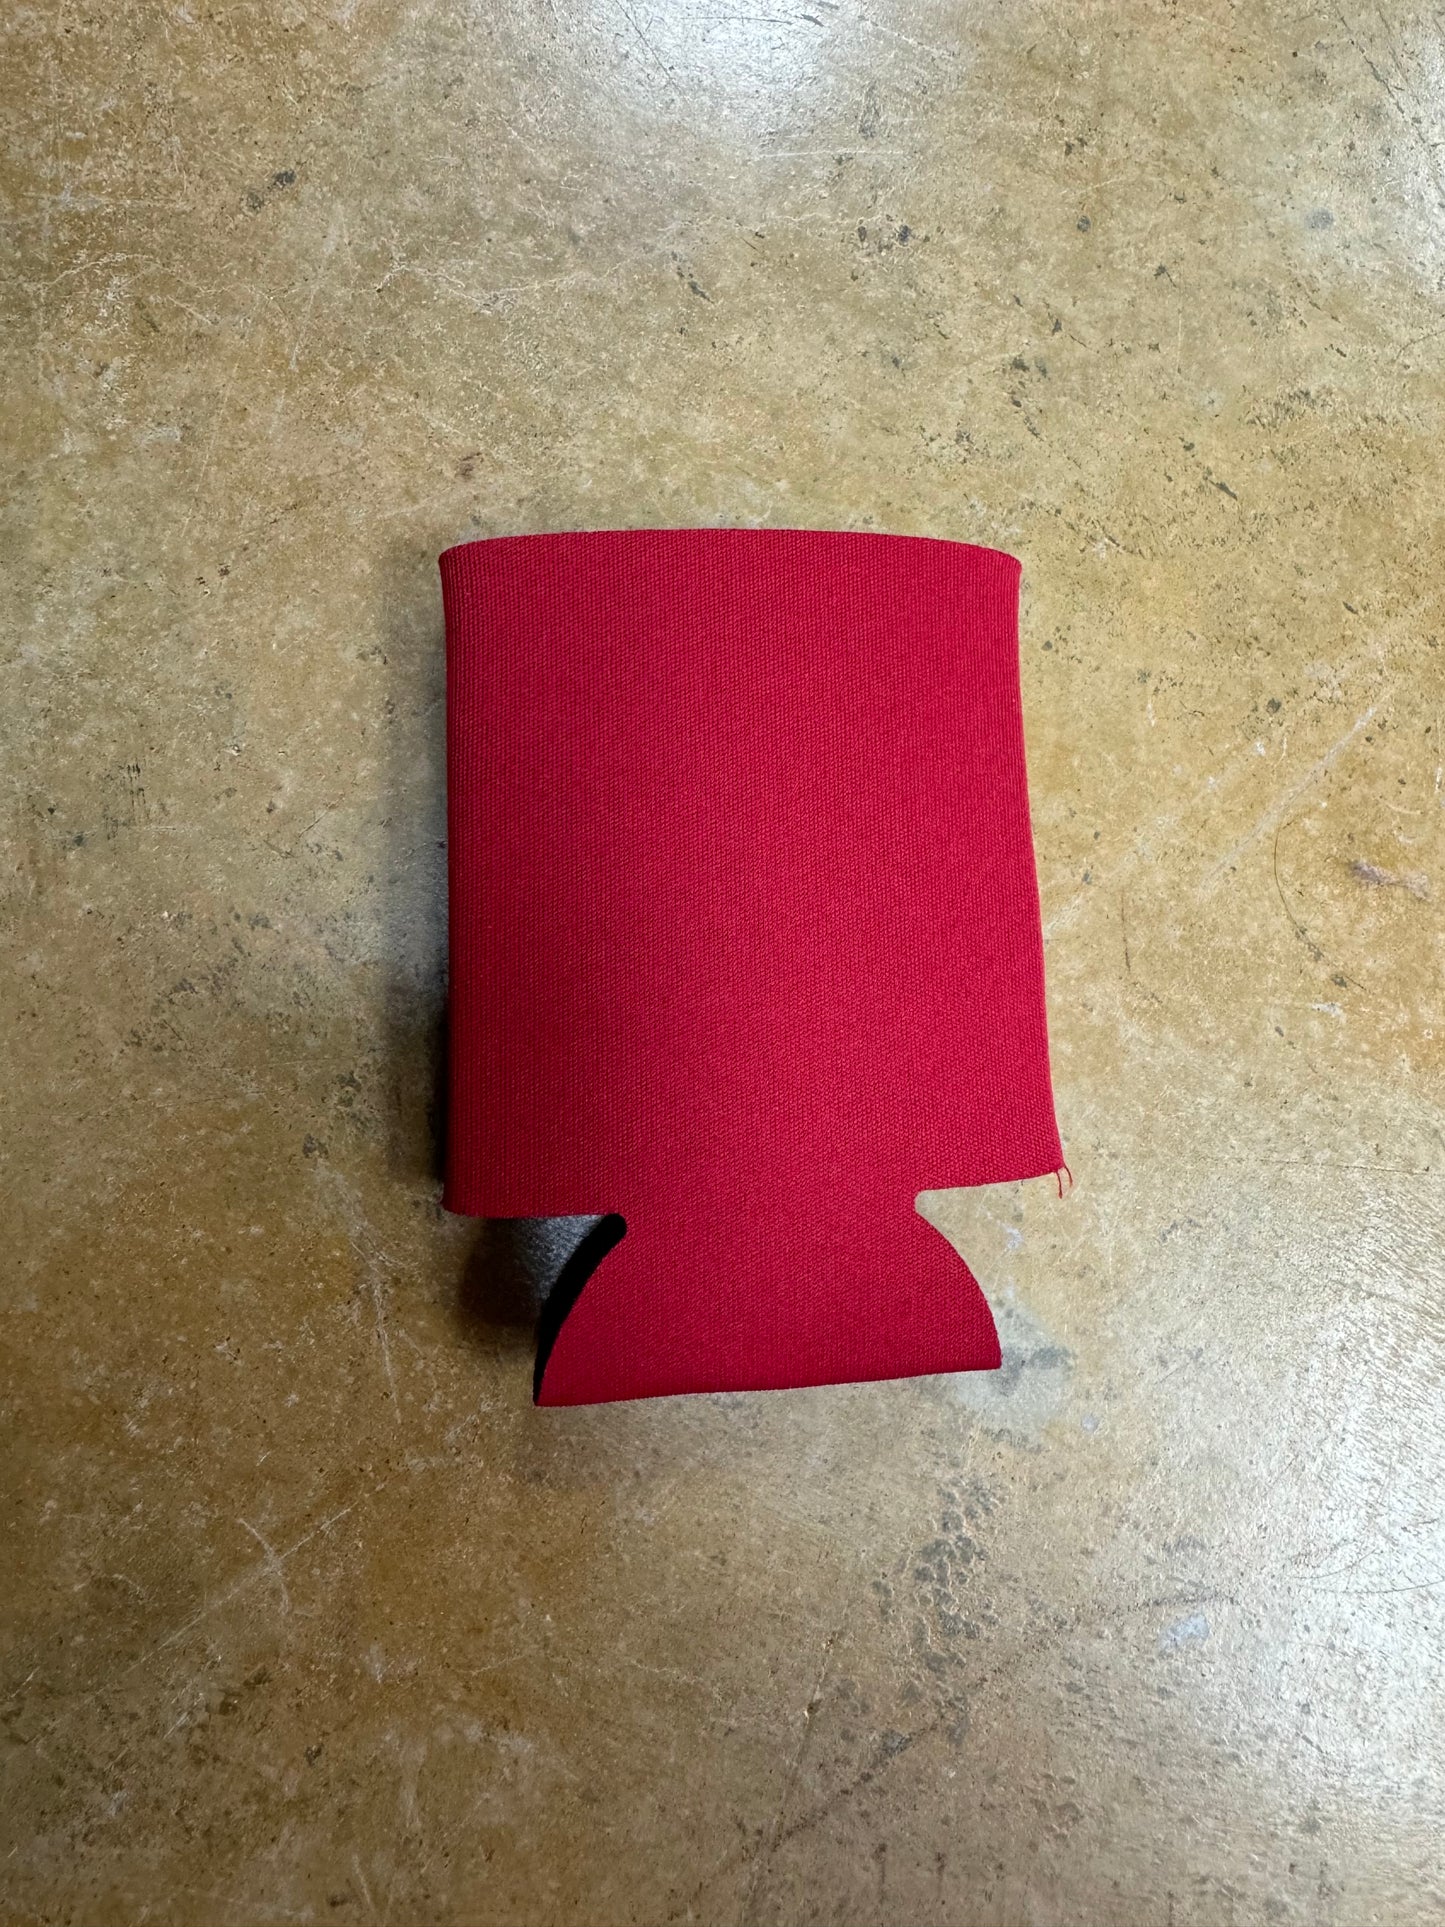 Blank Koozies Available In-Store – Customize Your Own!